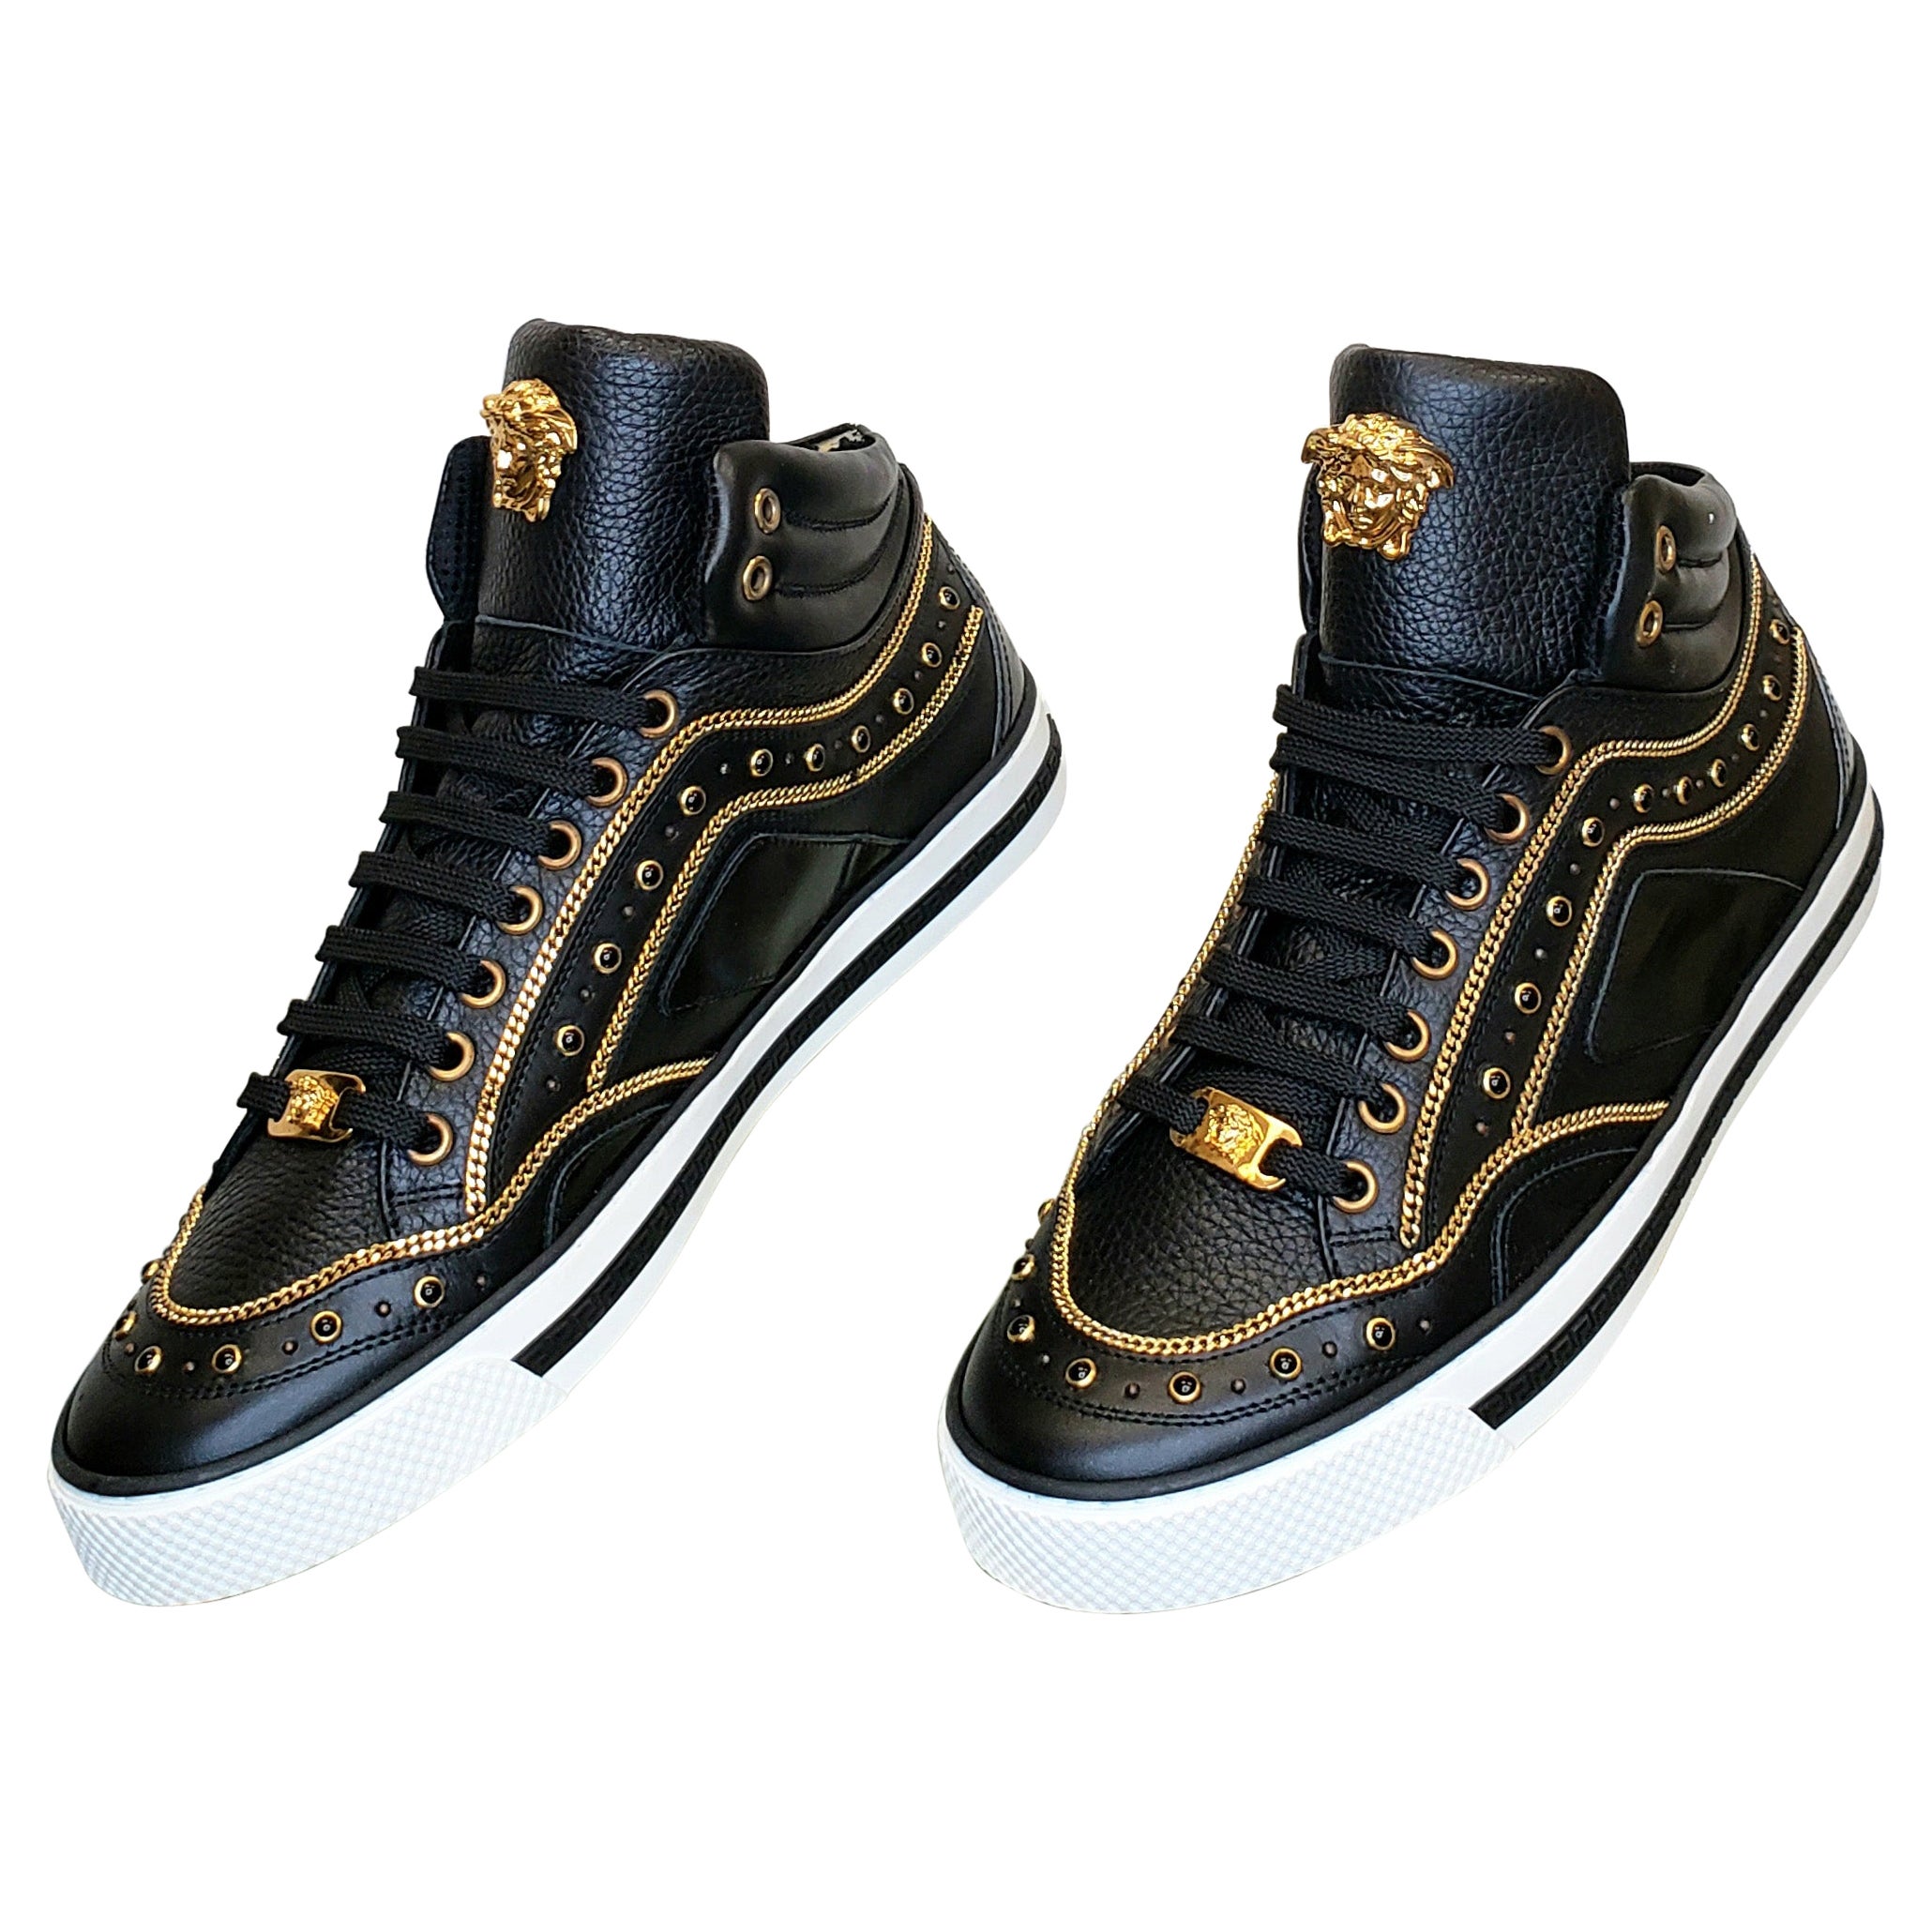 NEW VERSACE STUDDED HIGH-TOP SNEAKERS with GOLD 3D MEDUSA BUCKLE SIZE 43 - 10